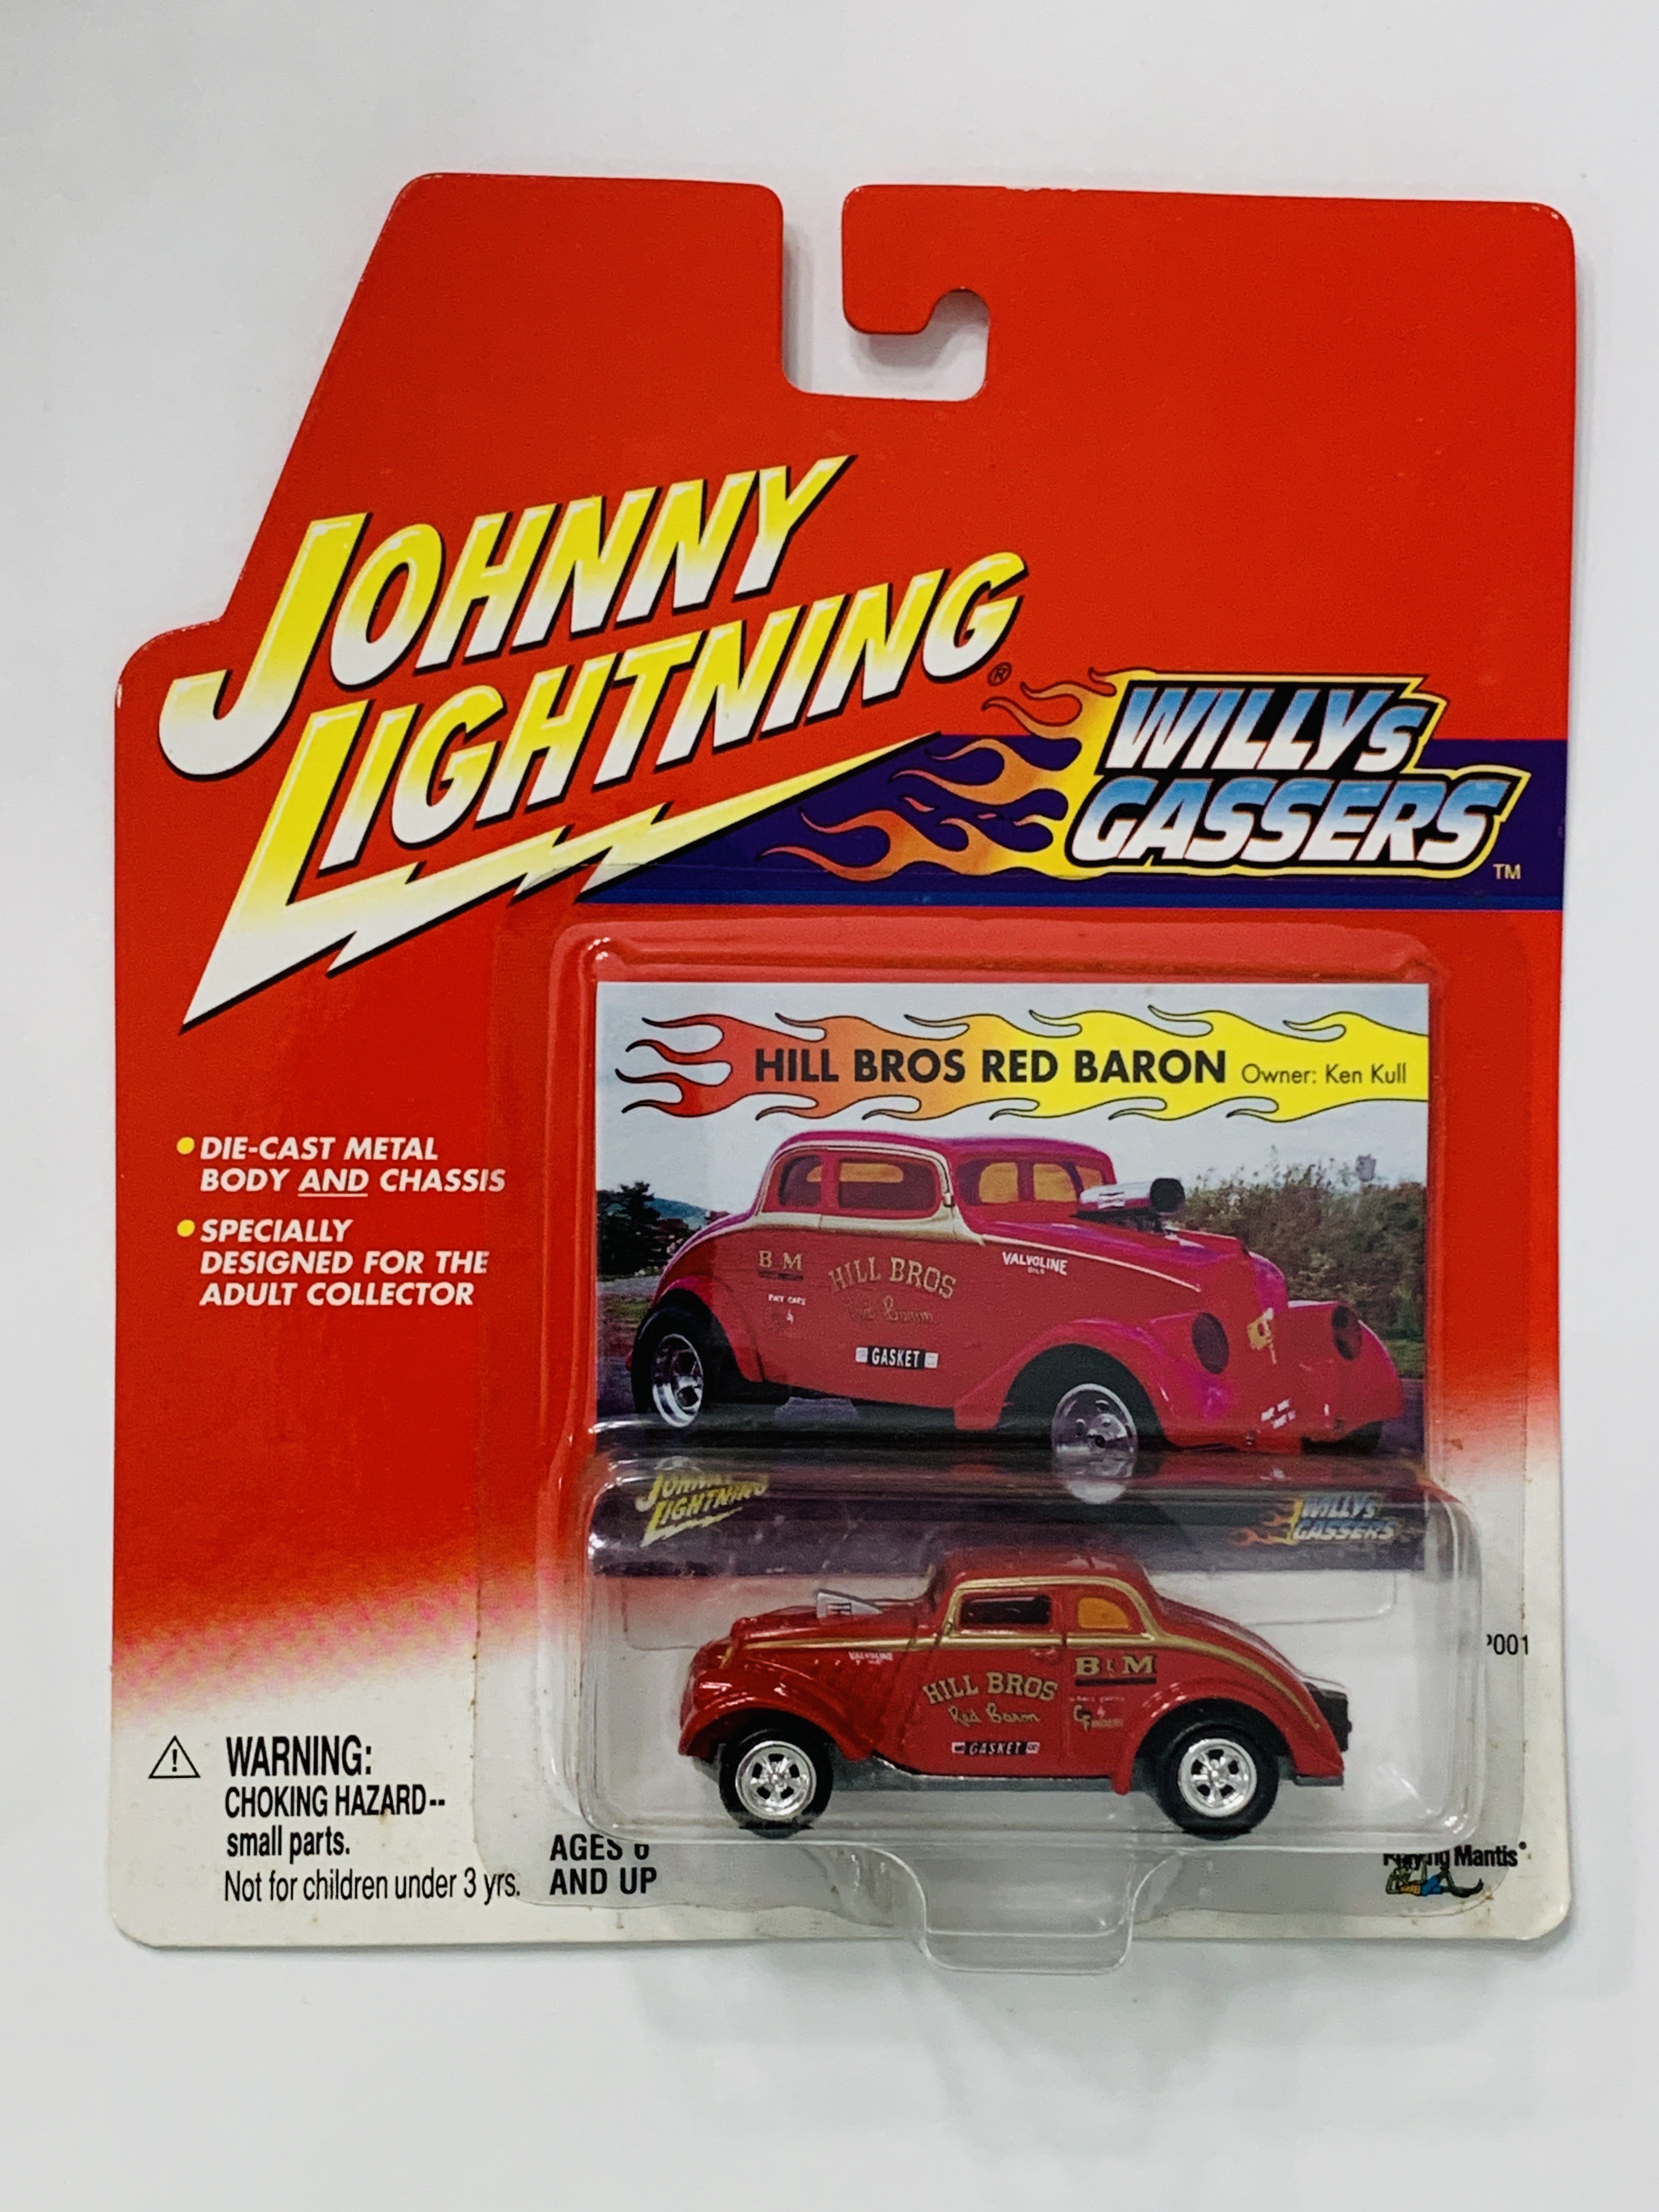 Johnny Lightning Willys Gassers Hills Bros Red Baron